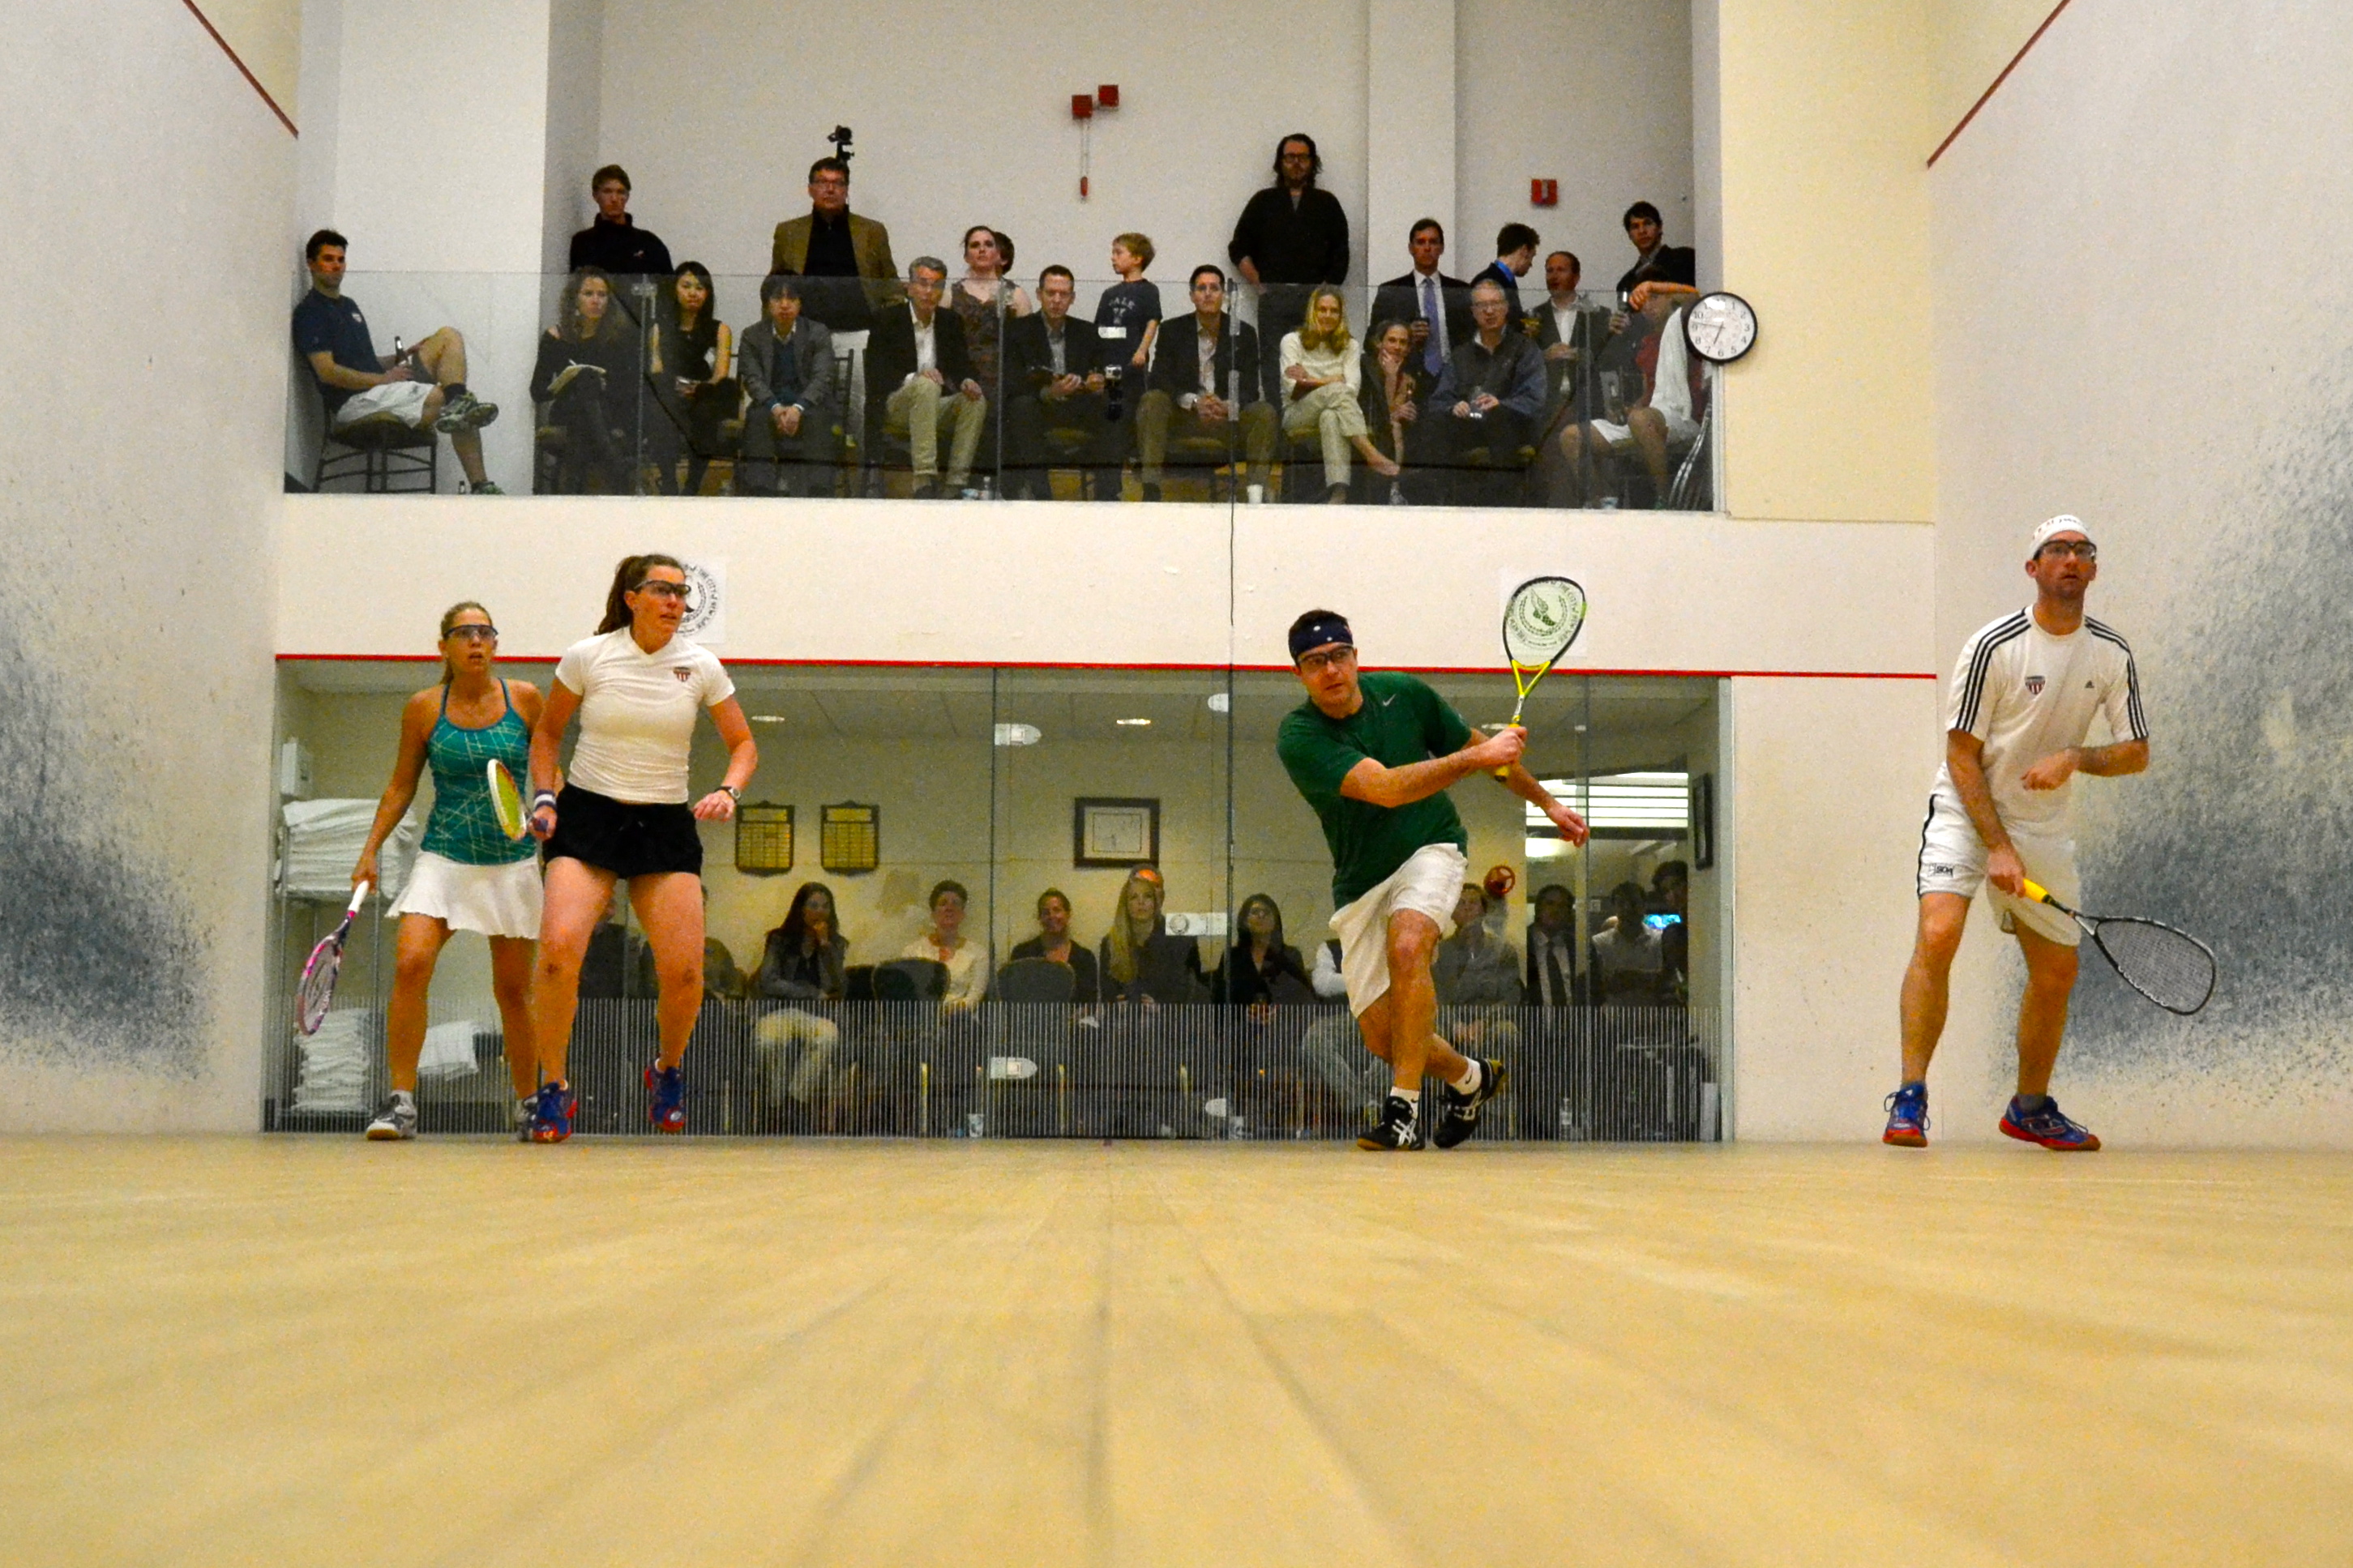 Despite dropping the third game in the Richmond Mixed Open final, the No. 1 seeds, Narelle Krizek (L) and Paul Price (in green), took care of business over the No. 3 seeds, Natalie Grainger and Preston Quick. 